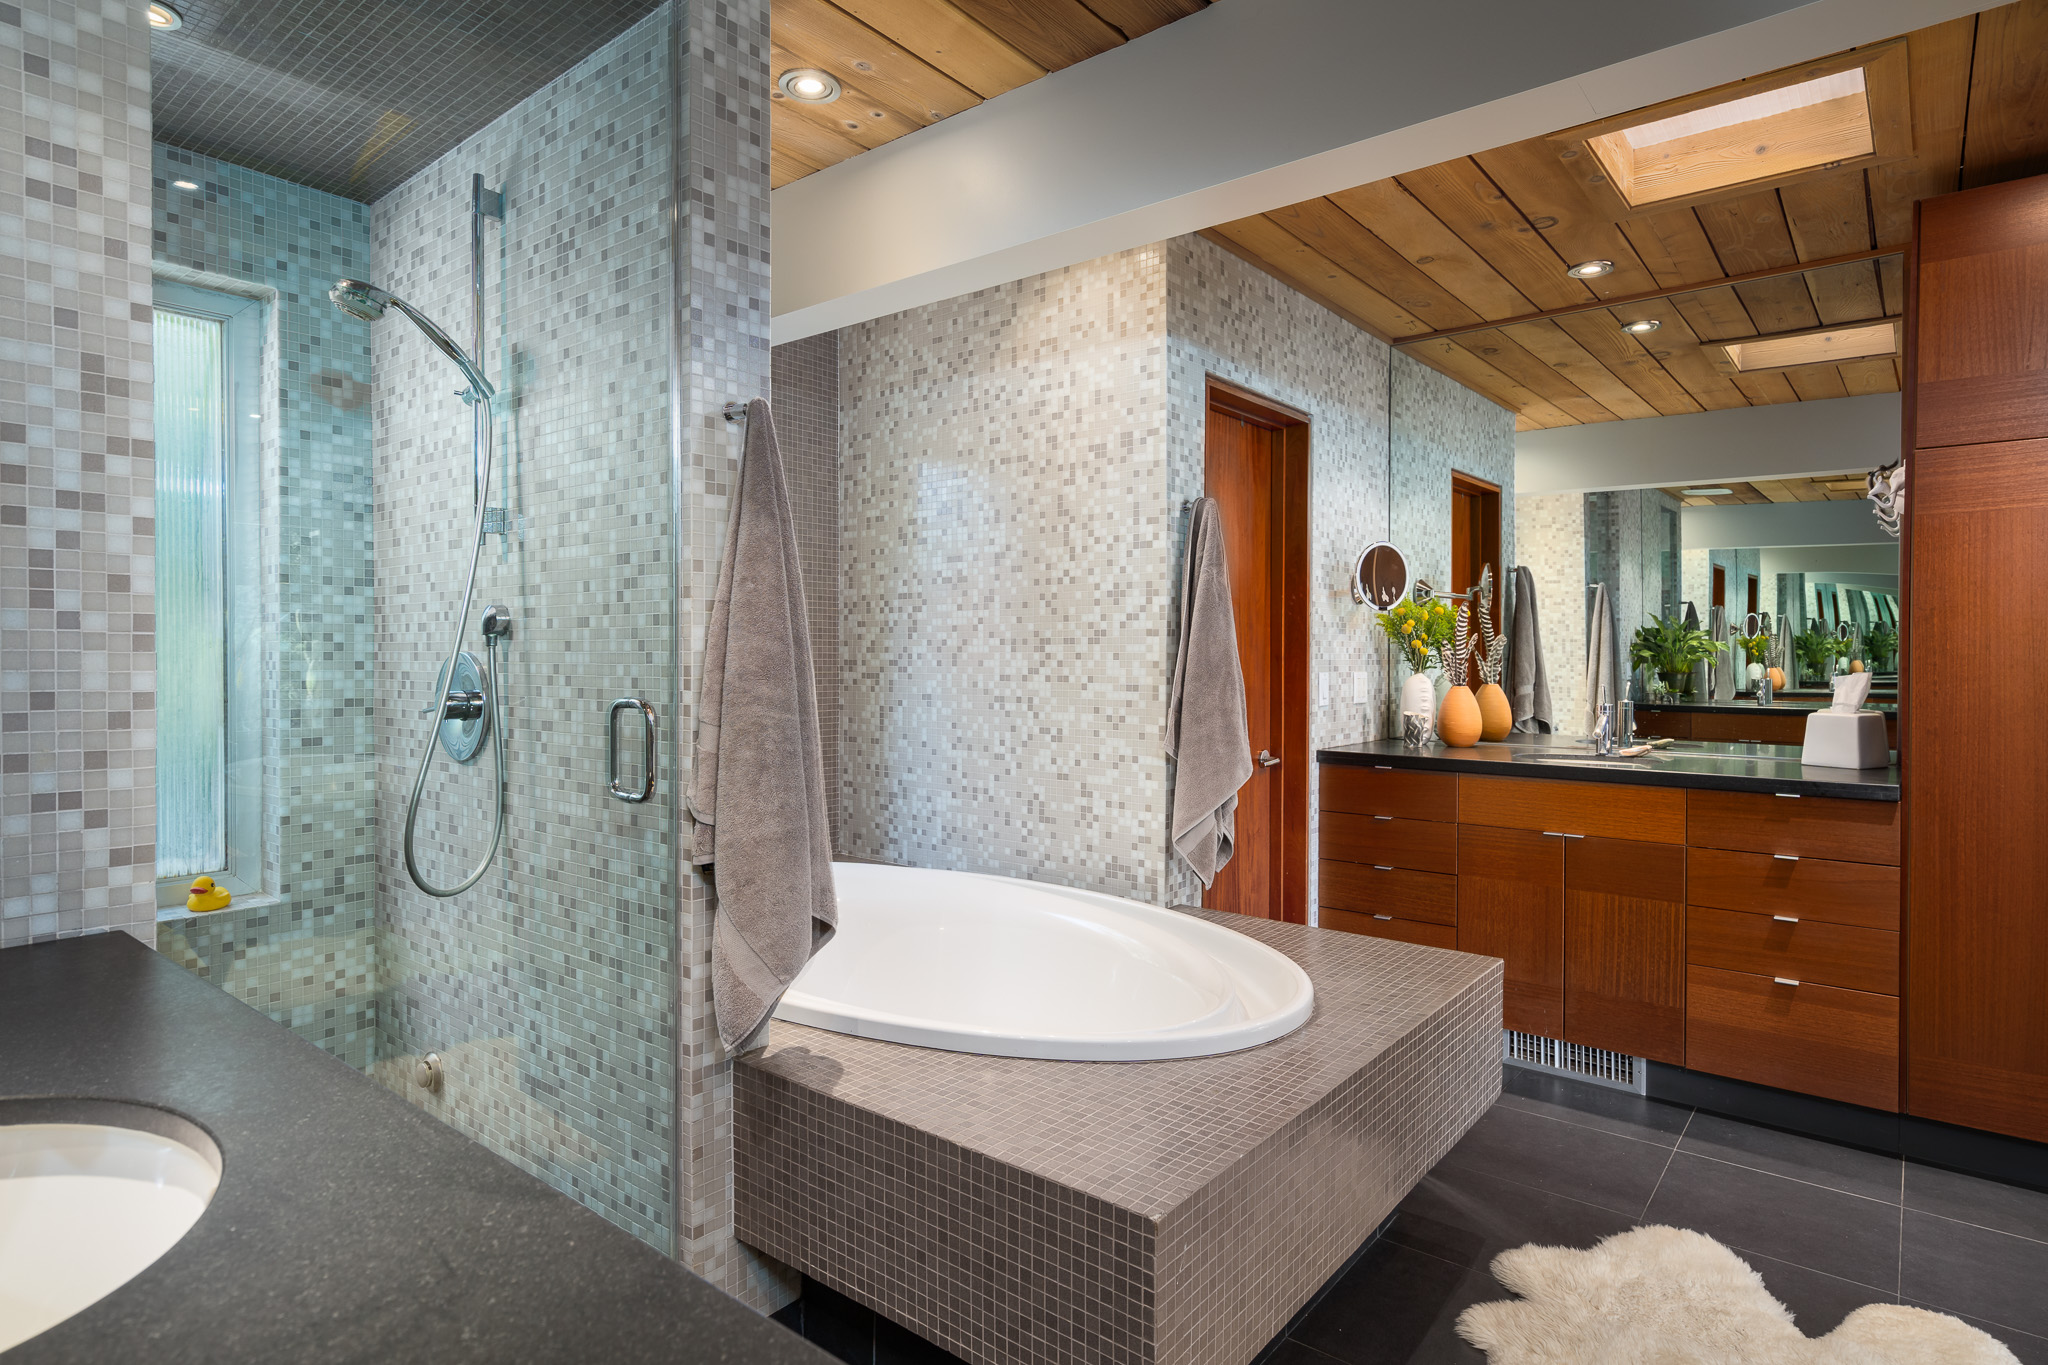 interior design bathroom with tiled shower and bathtub, wood cupboards and storage, mirror